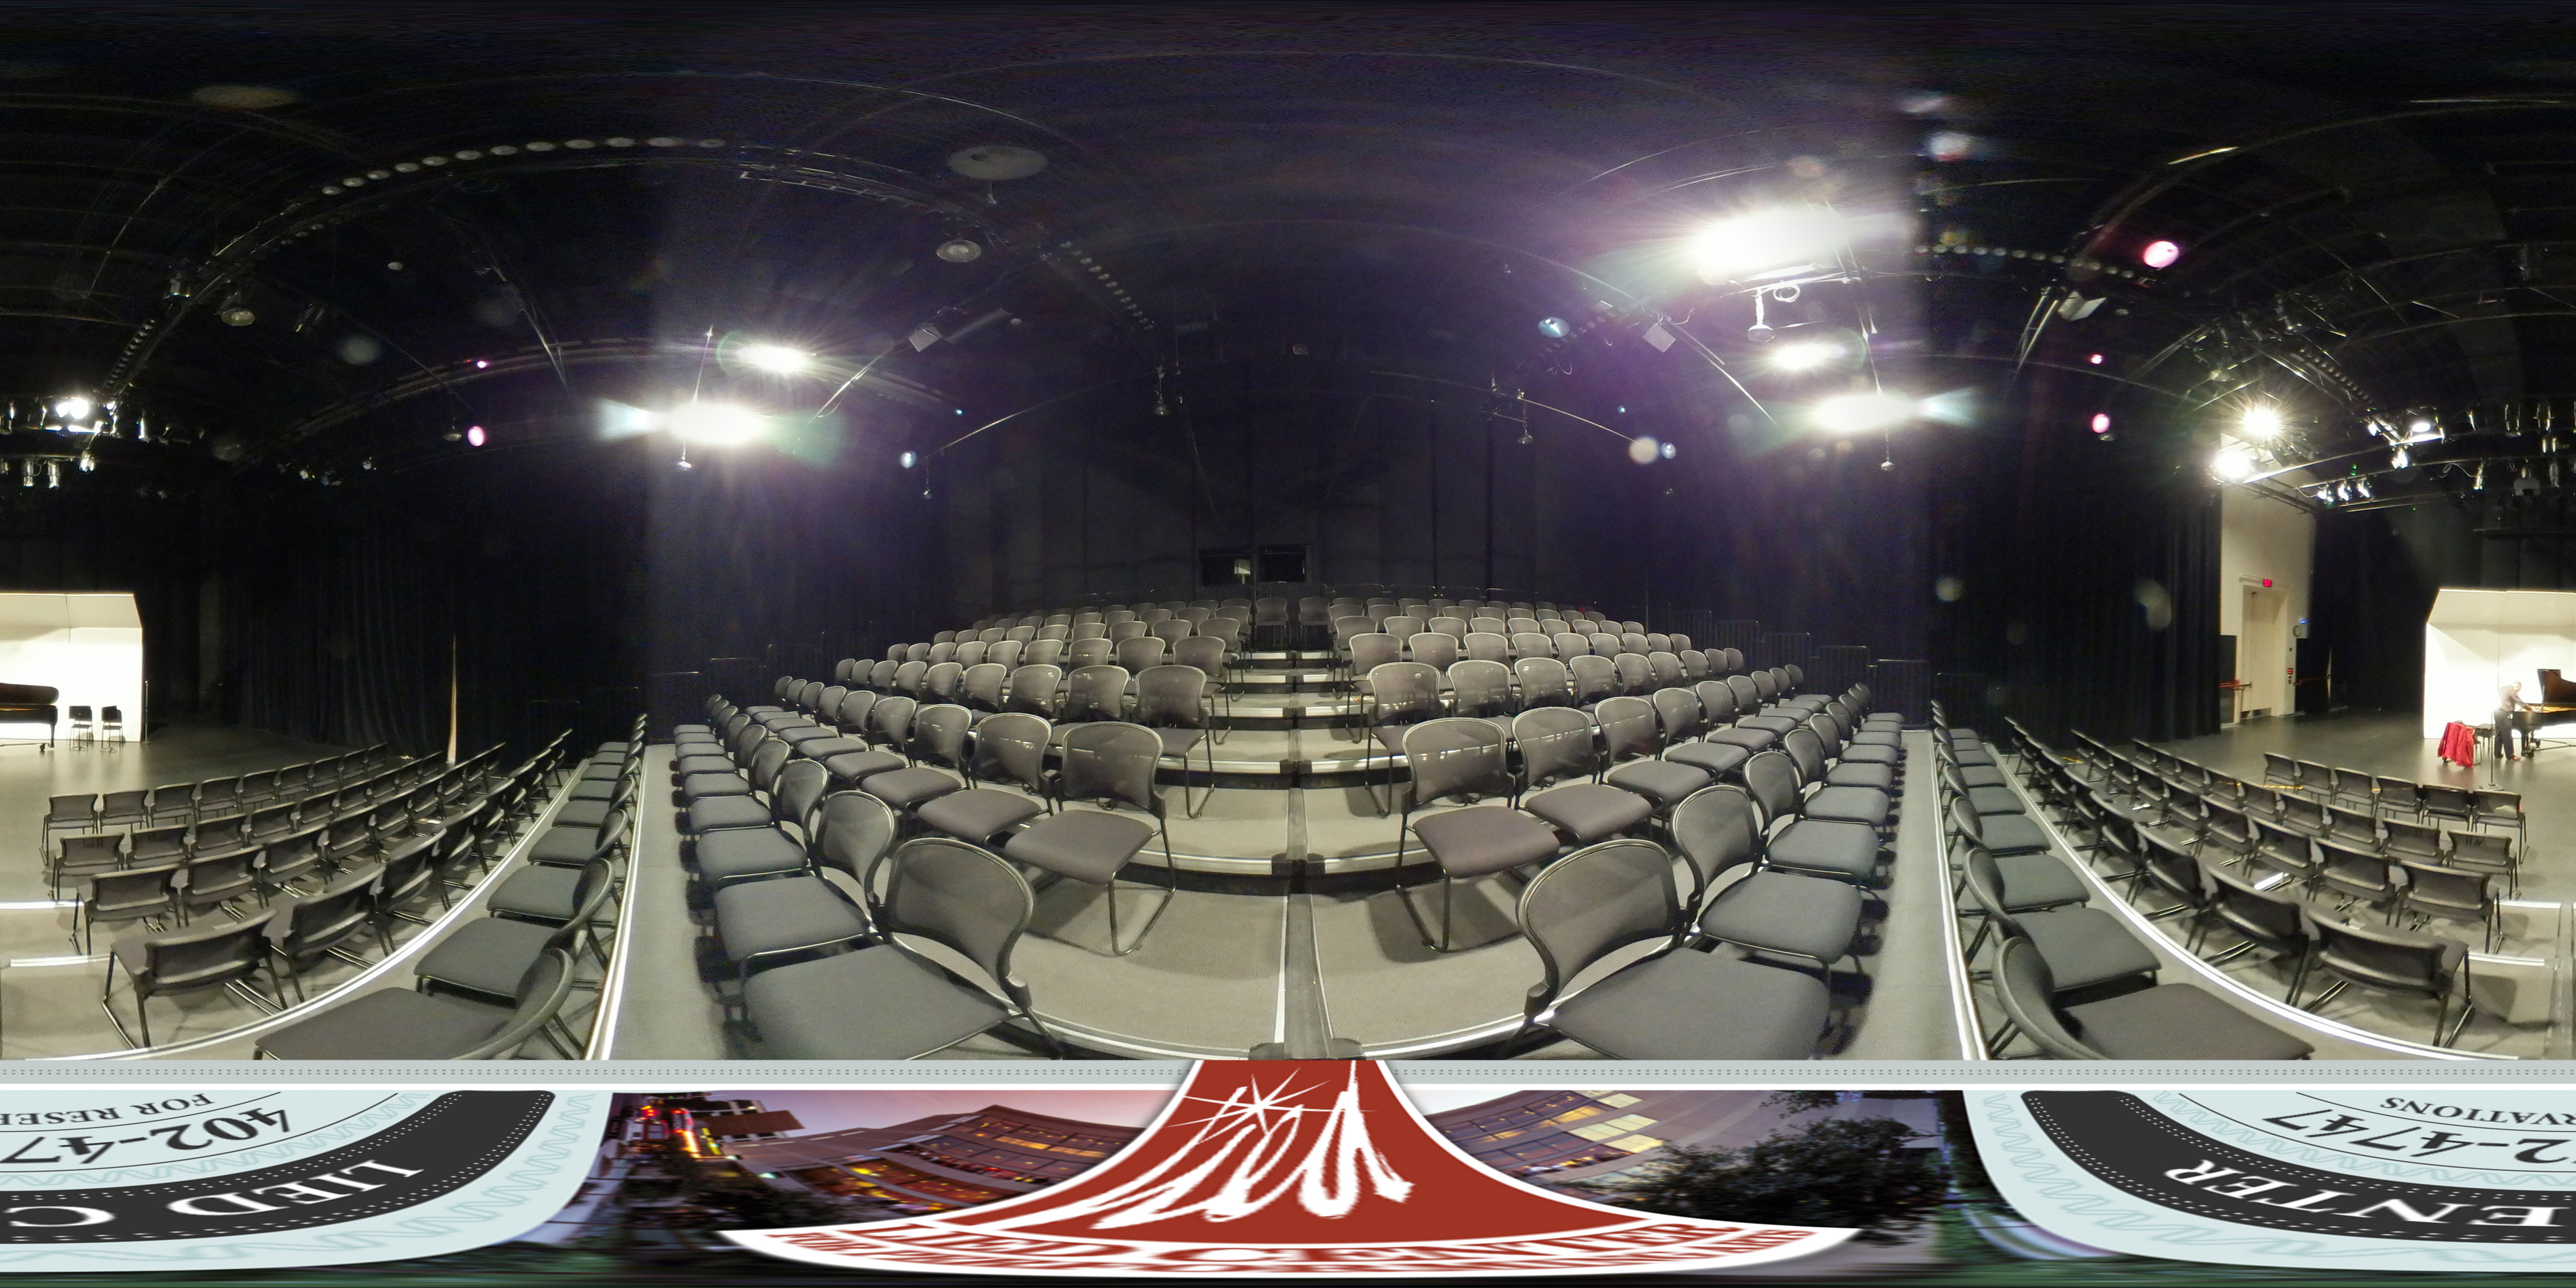 Virtual tour of the Lied Center Johnny Carson Theater taken from the risers showing a piano and small orchestra shell.